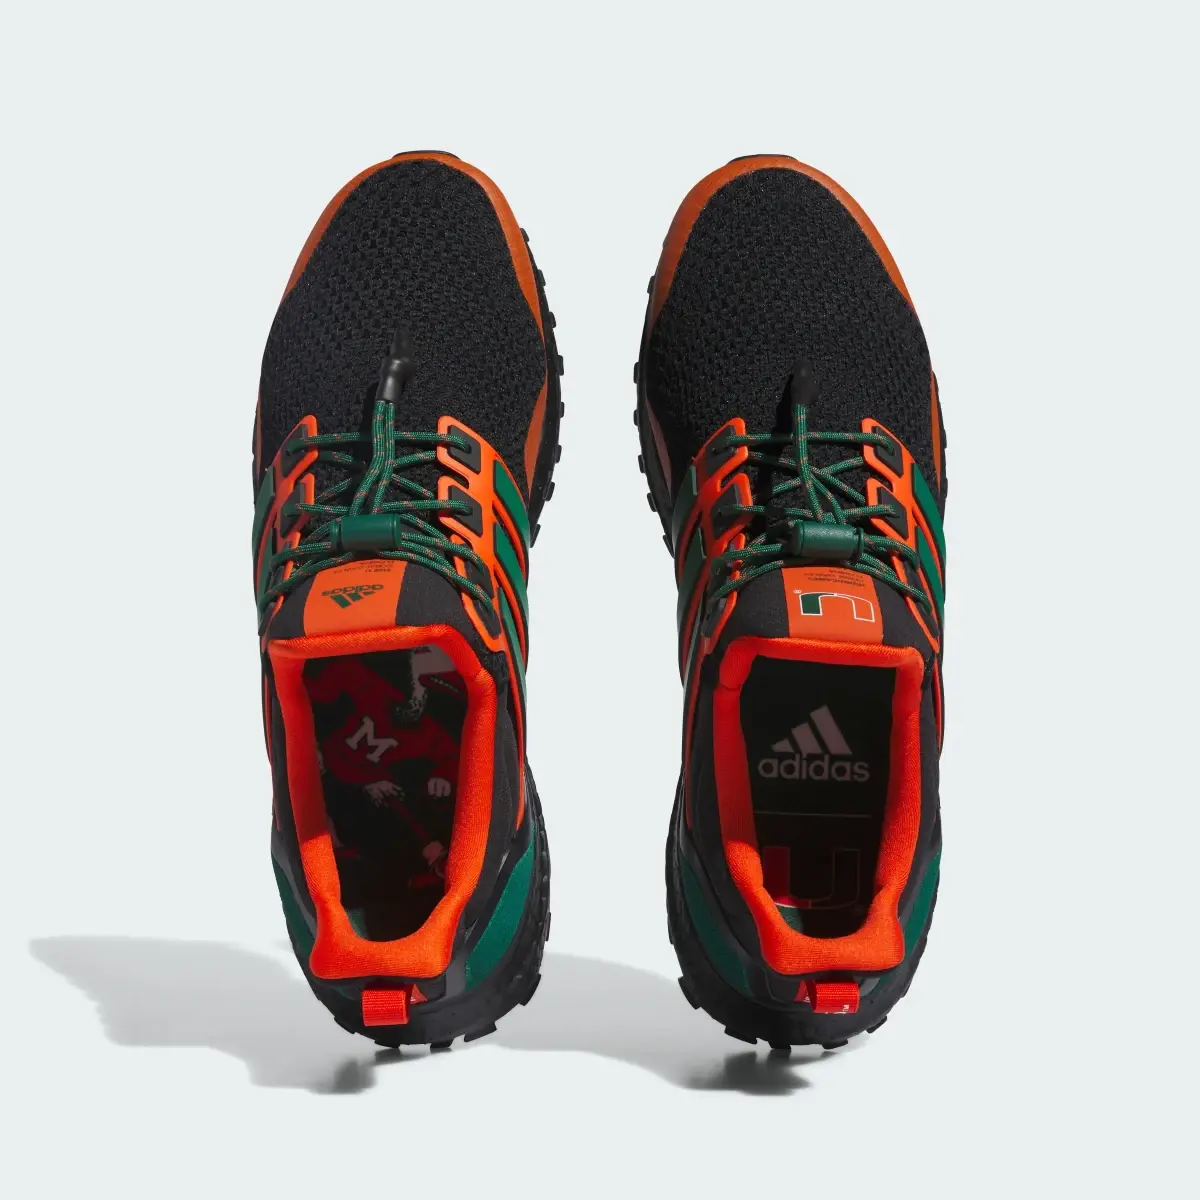 Adidas Miami Ultraboost 1.0 Shoes. 3